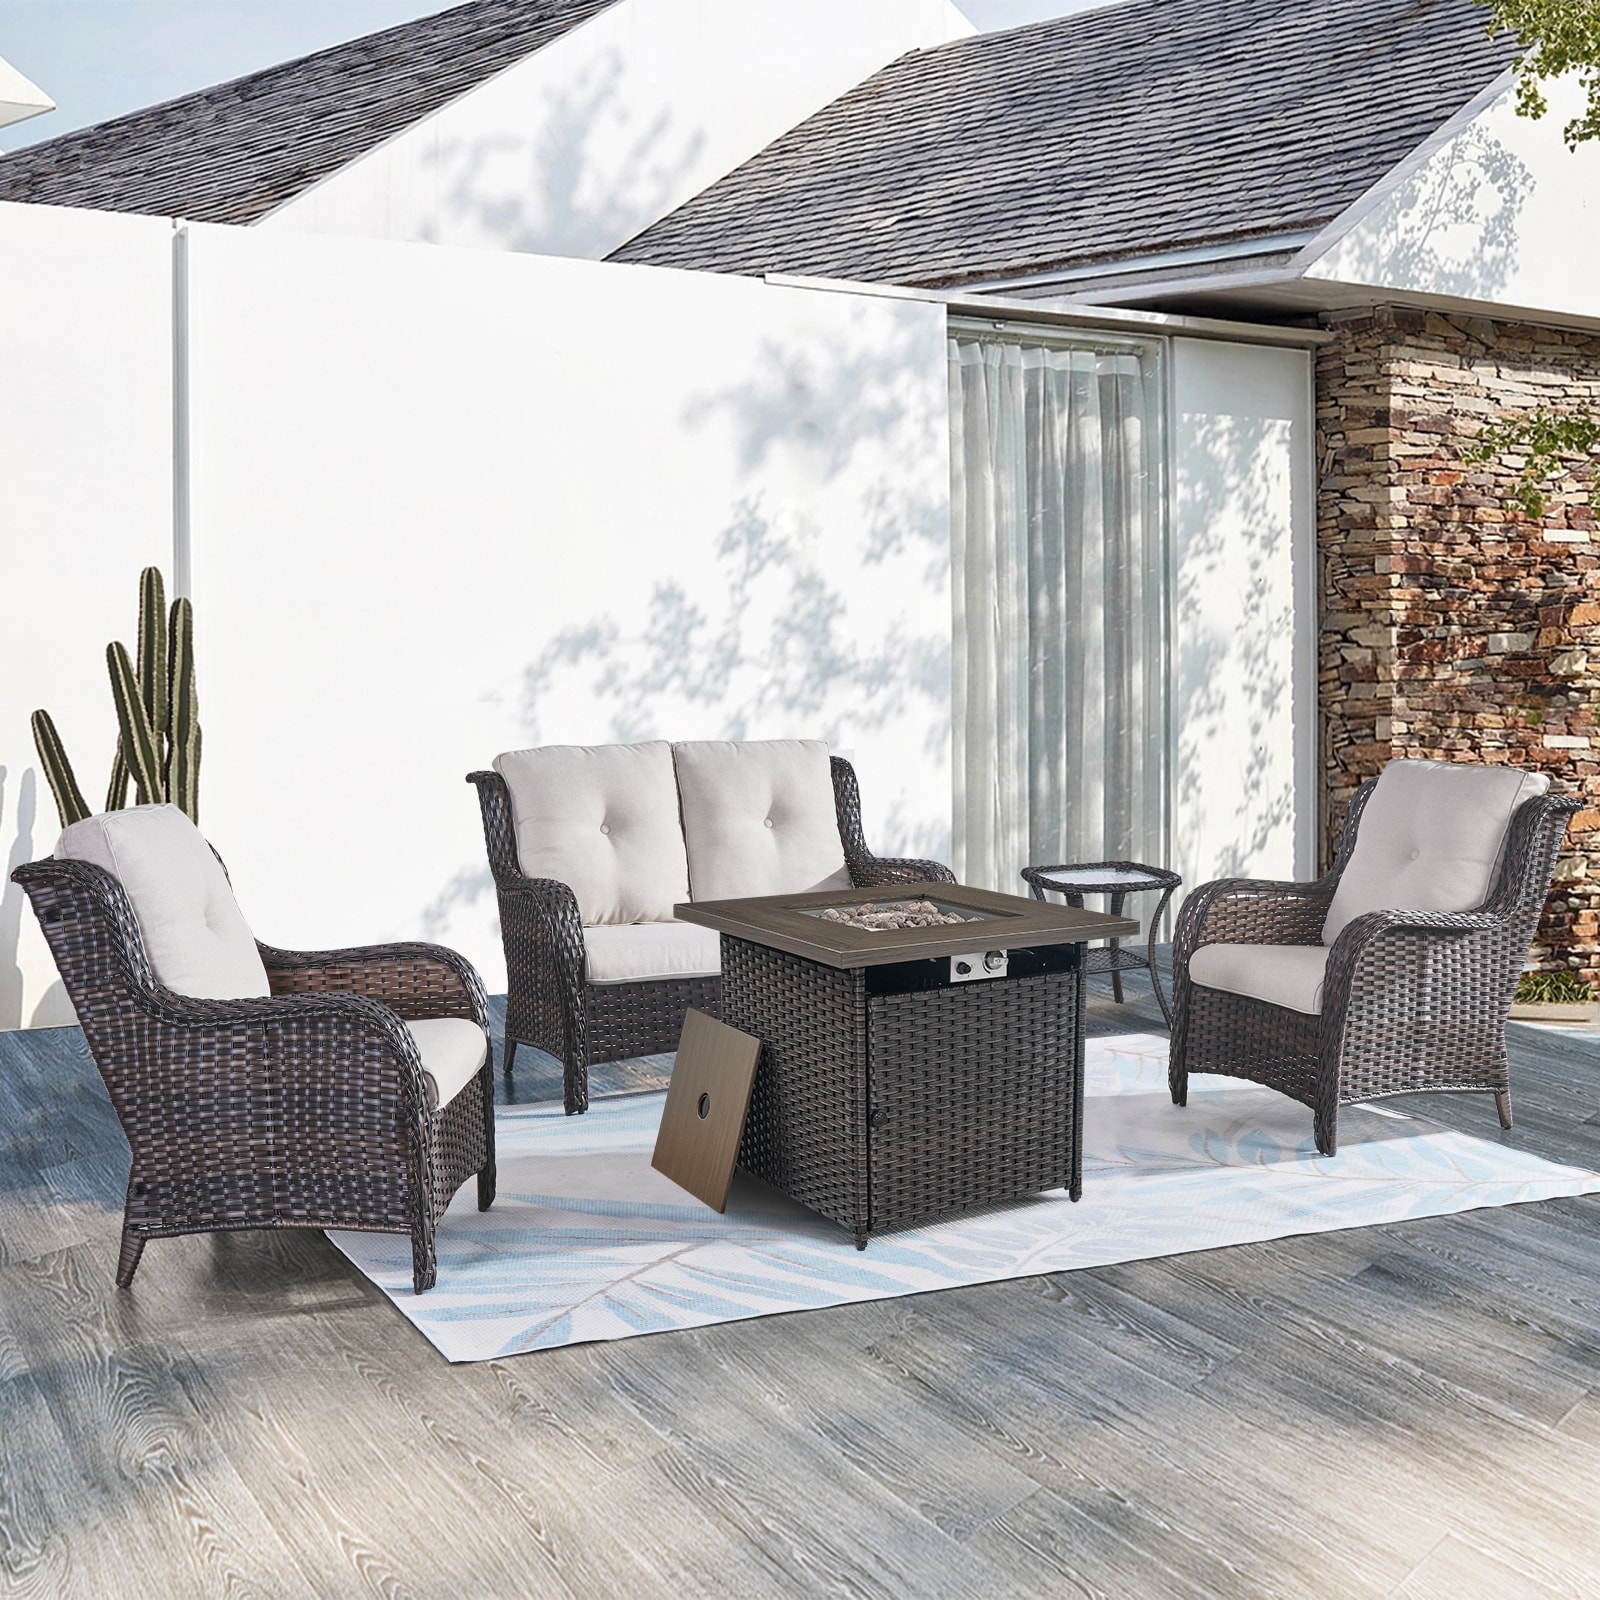 Pocassy Loveseat Sofa Pe Wicker Chair With Fire Pit Table